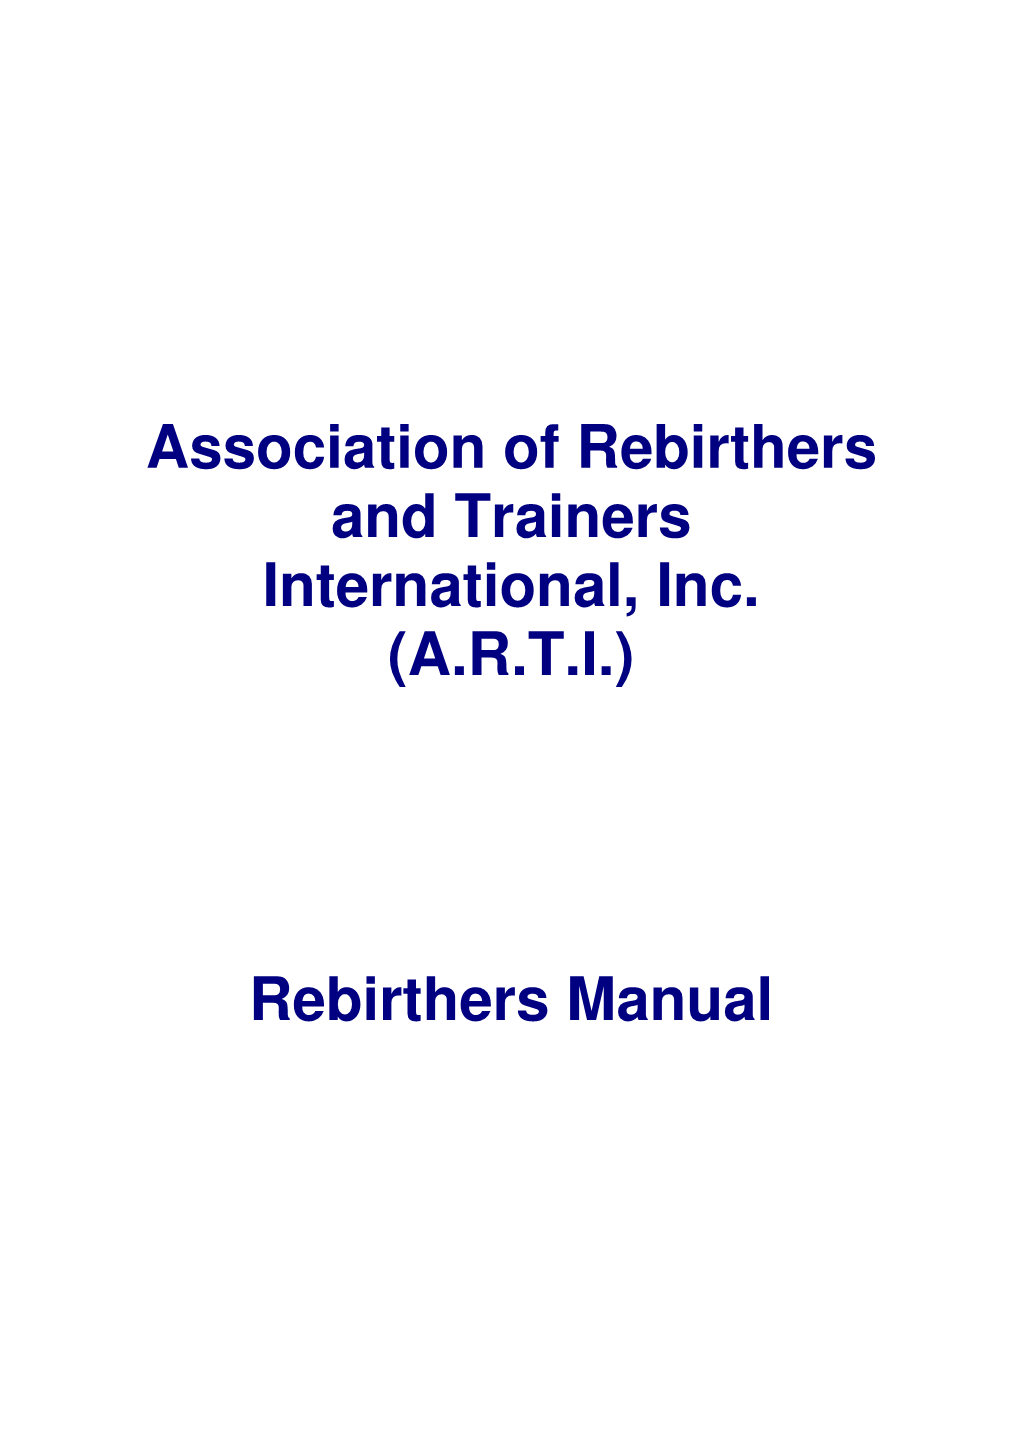 Association of Rebirthers and Trainers International, Inc. (ARTI)